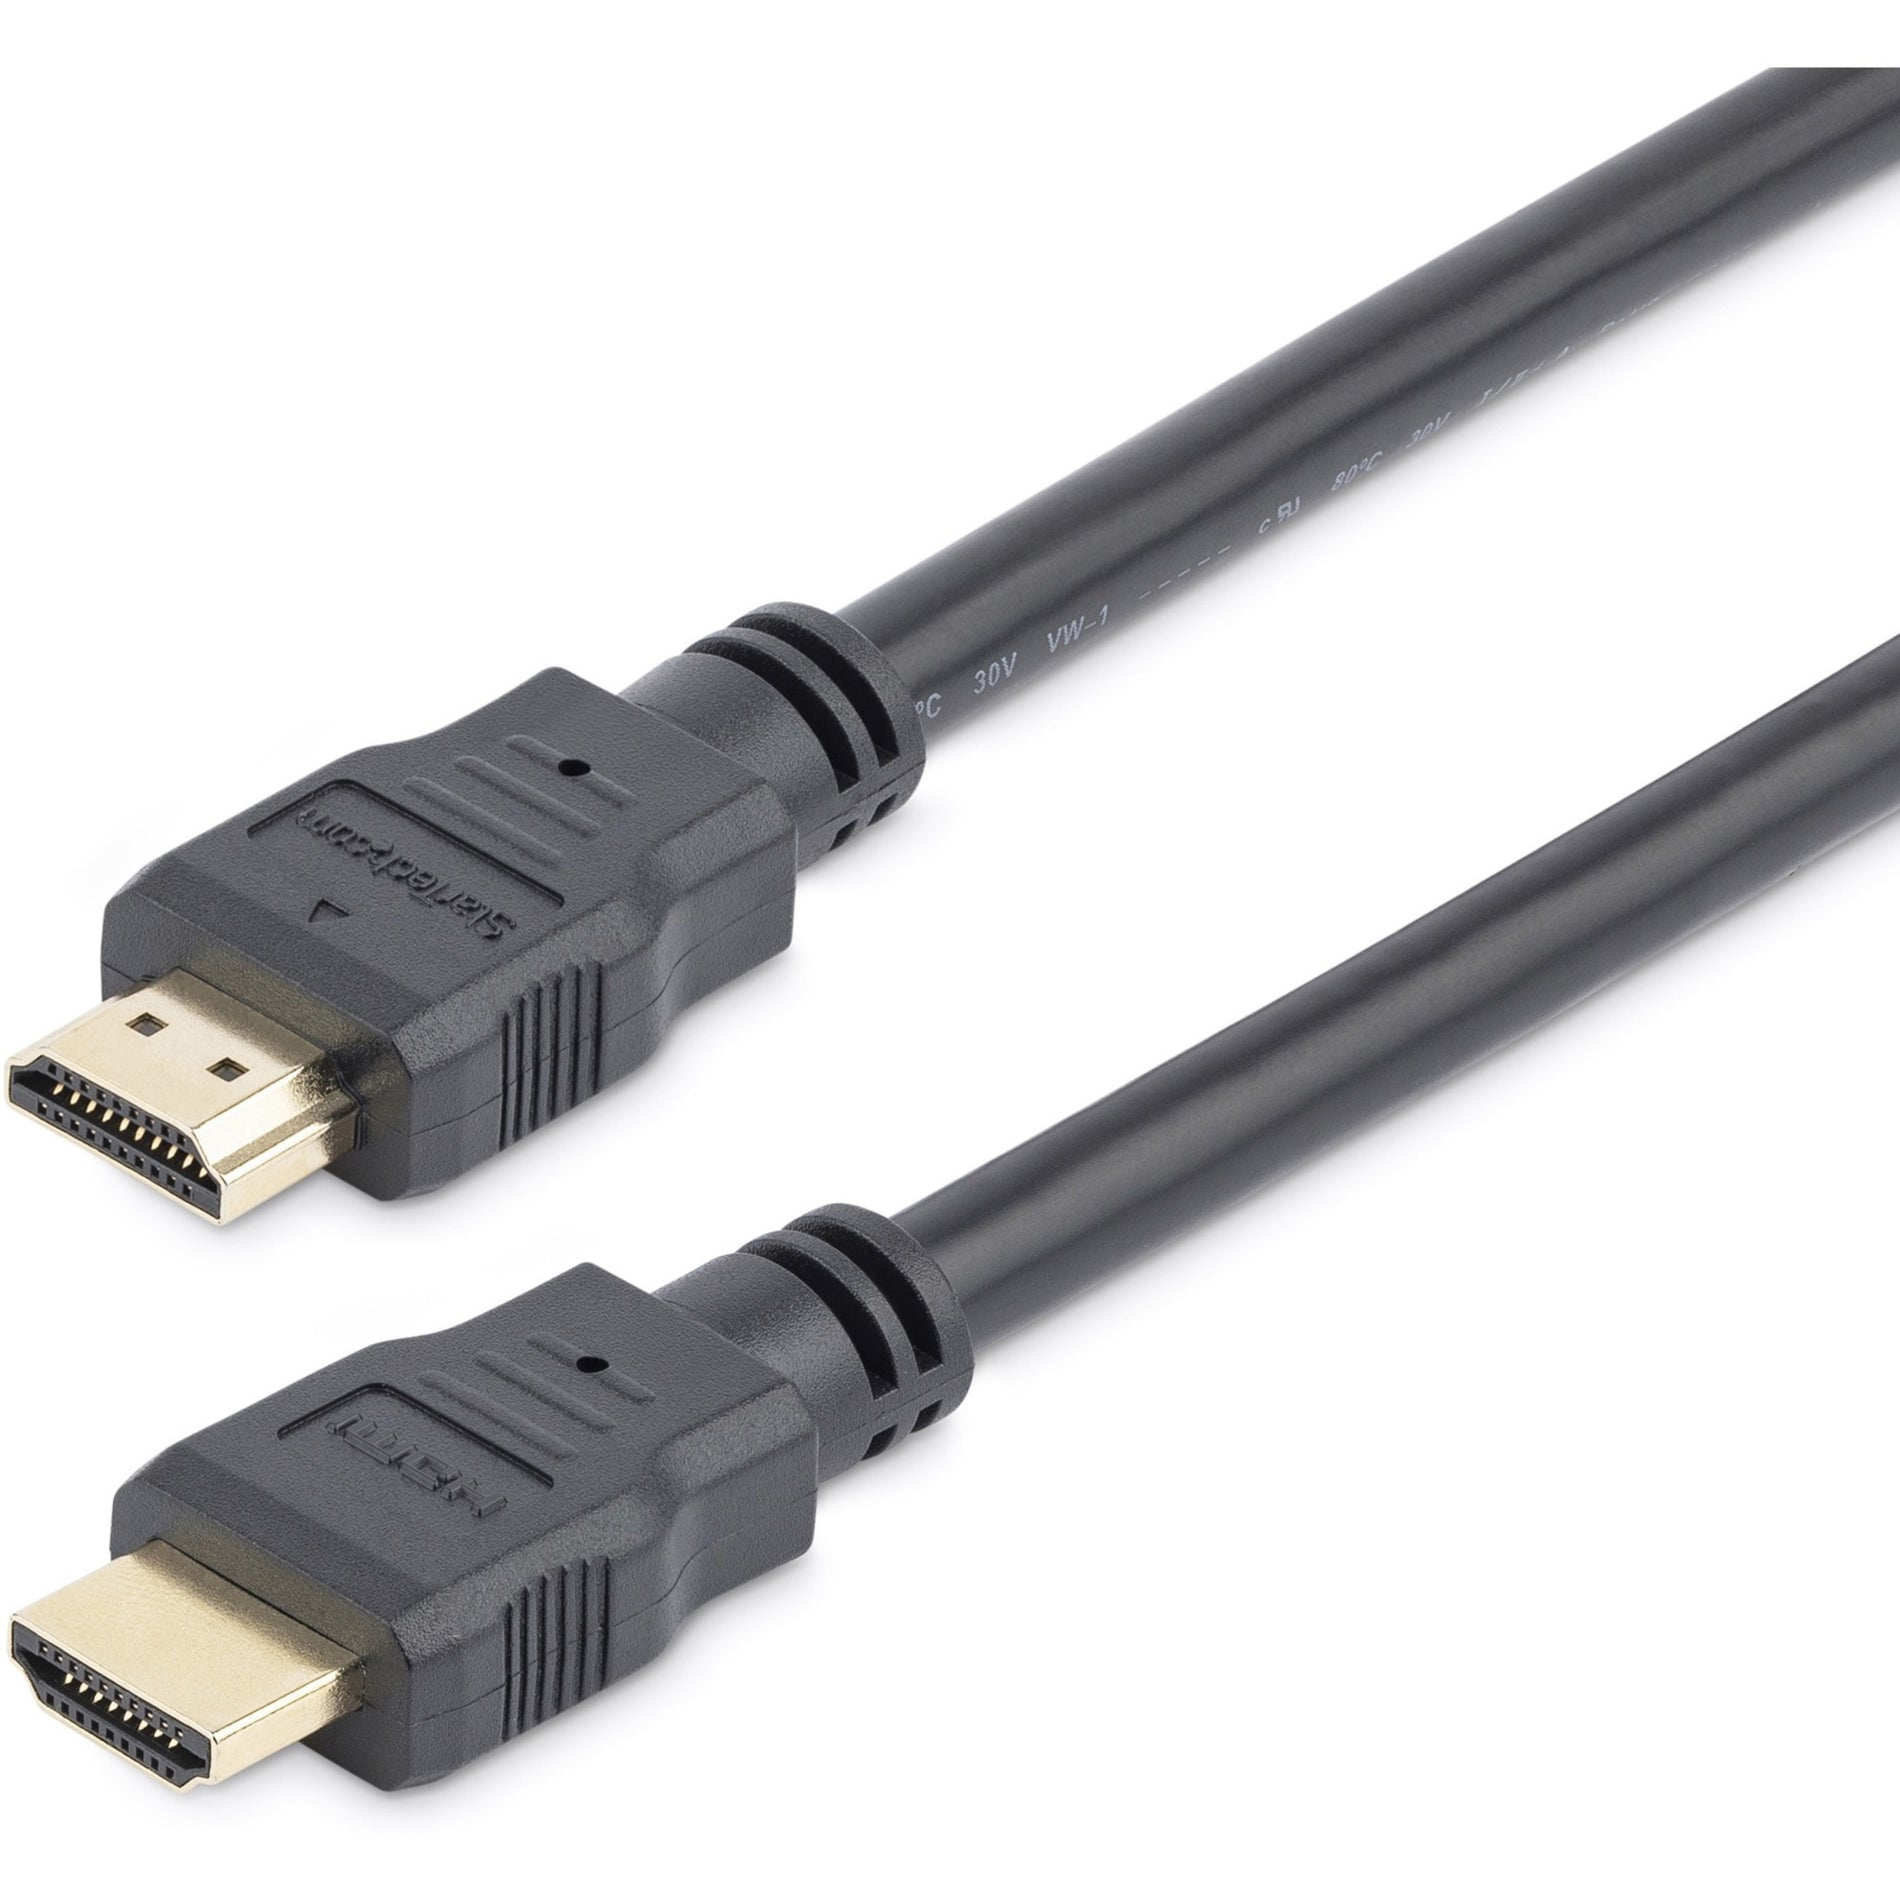 StarTech.com HDMM1 1 ft High Speed HDMI Cable - Ultra HD 4k x 2k HDMI Cable, Gold-Plated Connectors, Black